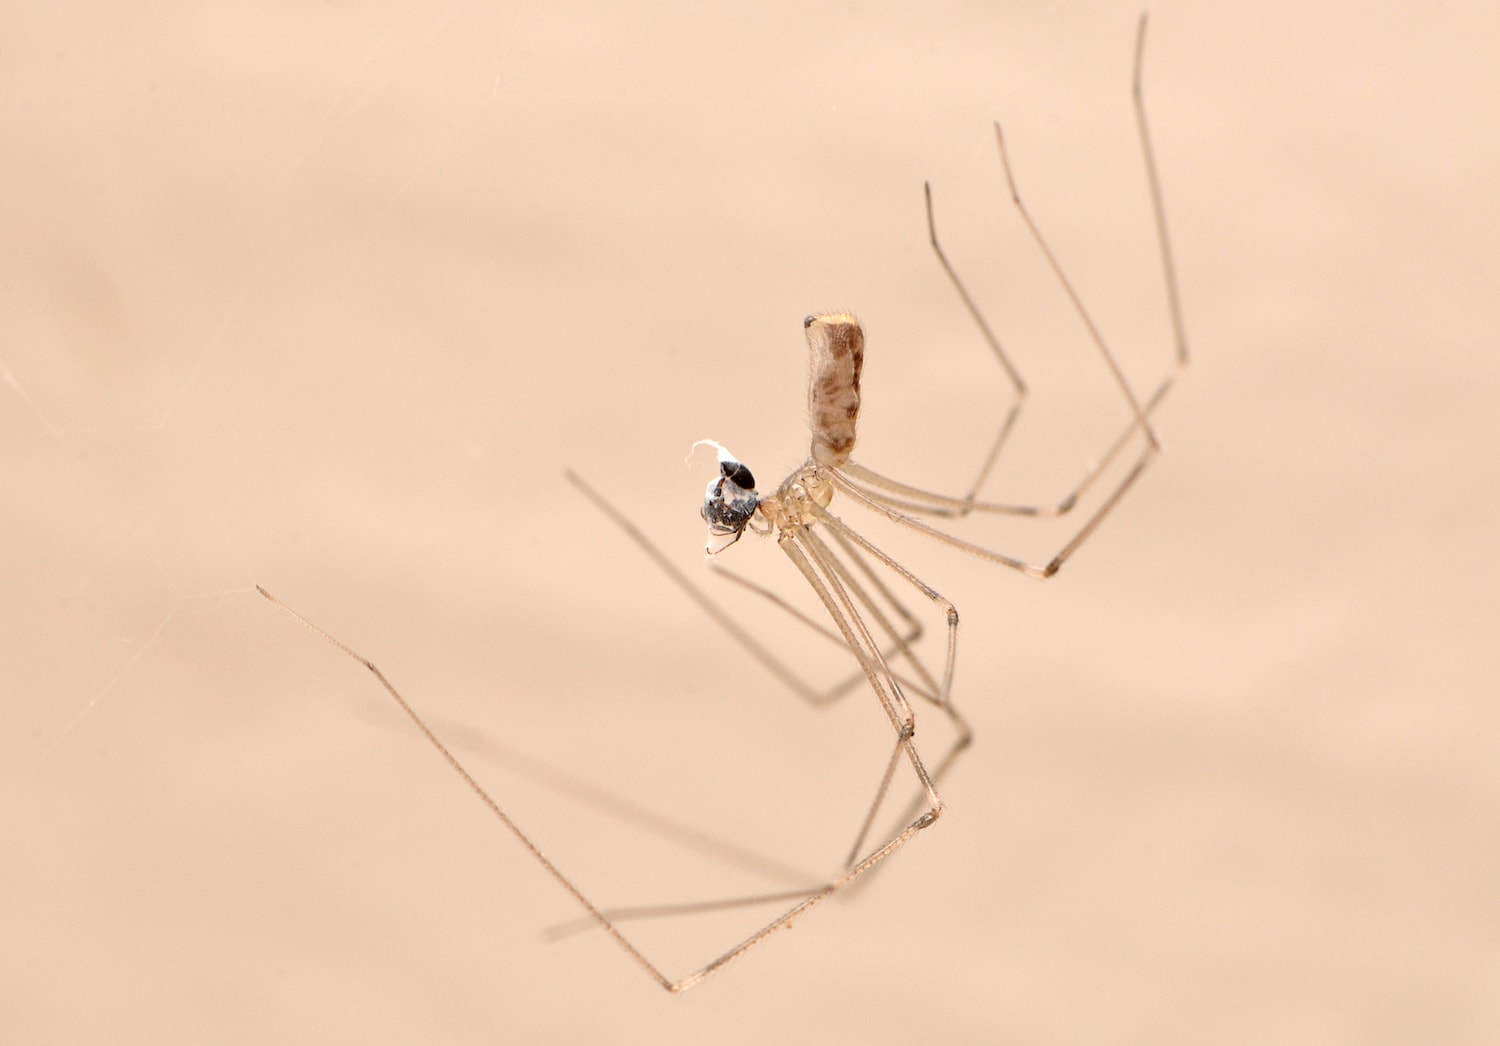 long body cellar spider facts